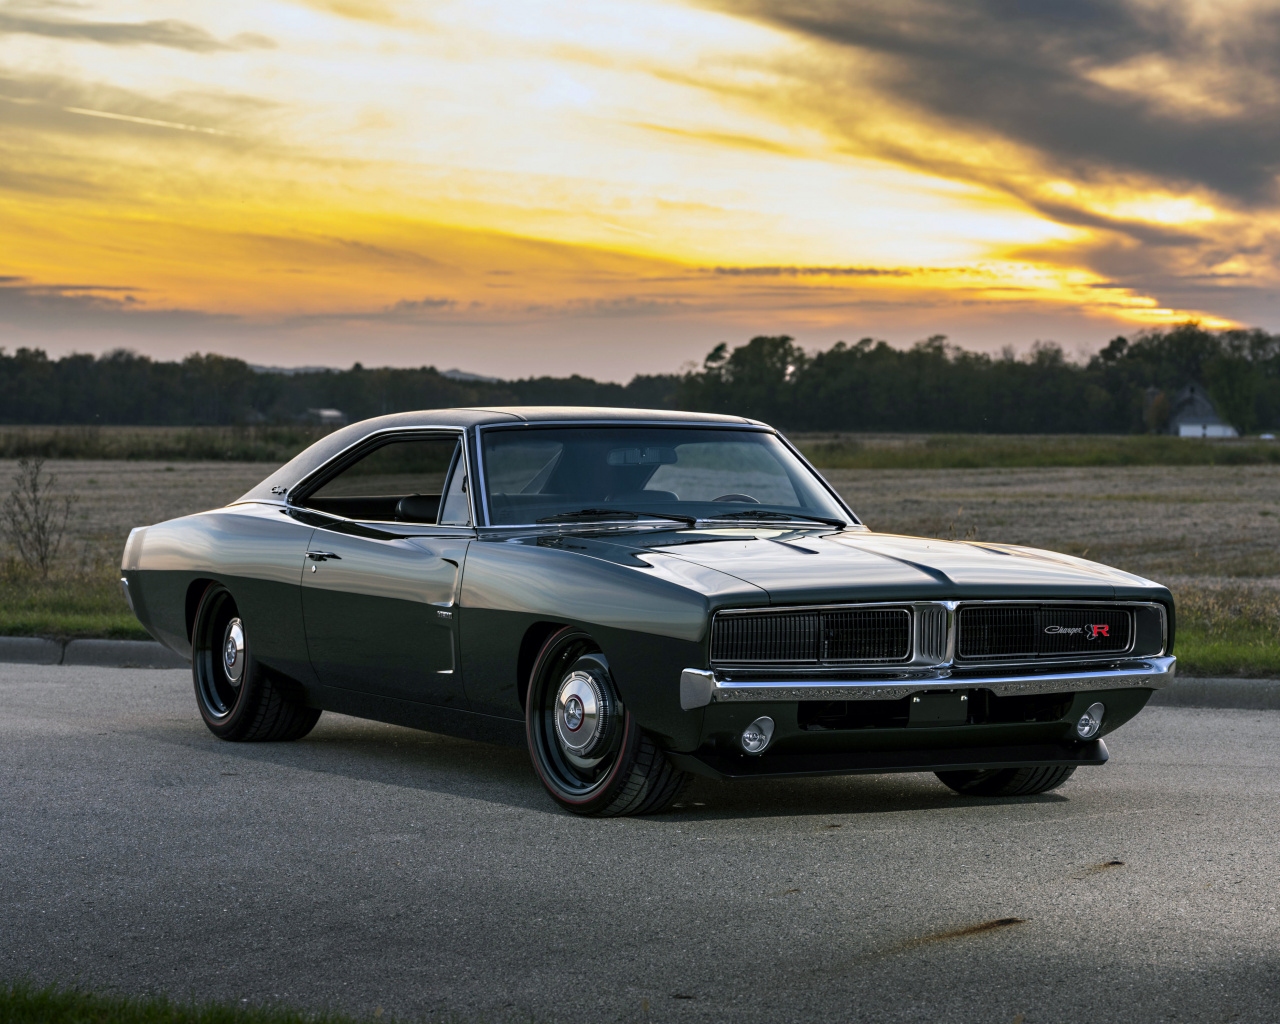 Dodge Charger Wallpaper Full Screen 1280x1024, - Ford Dodge Charger 69 - HD Wallpaper 